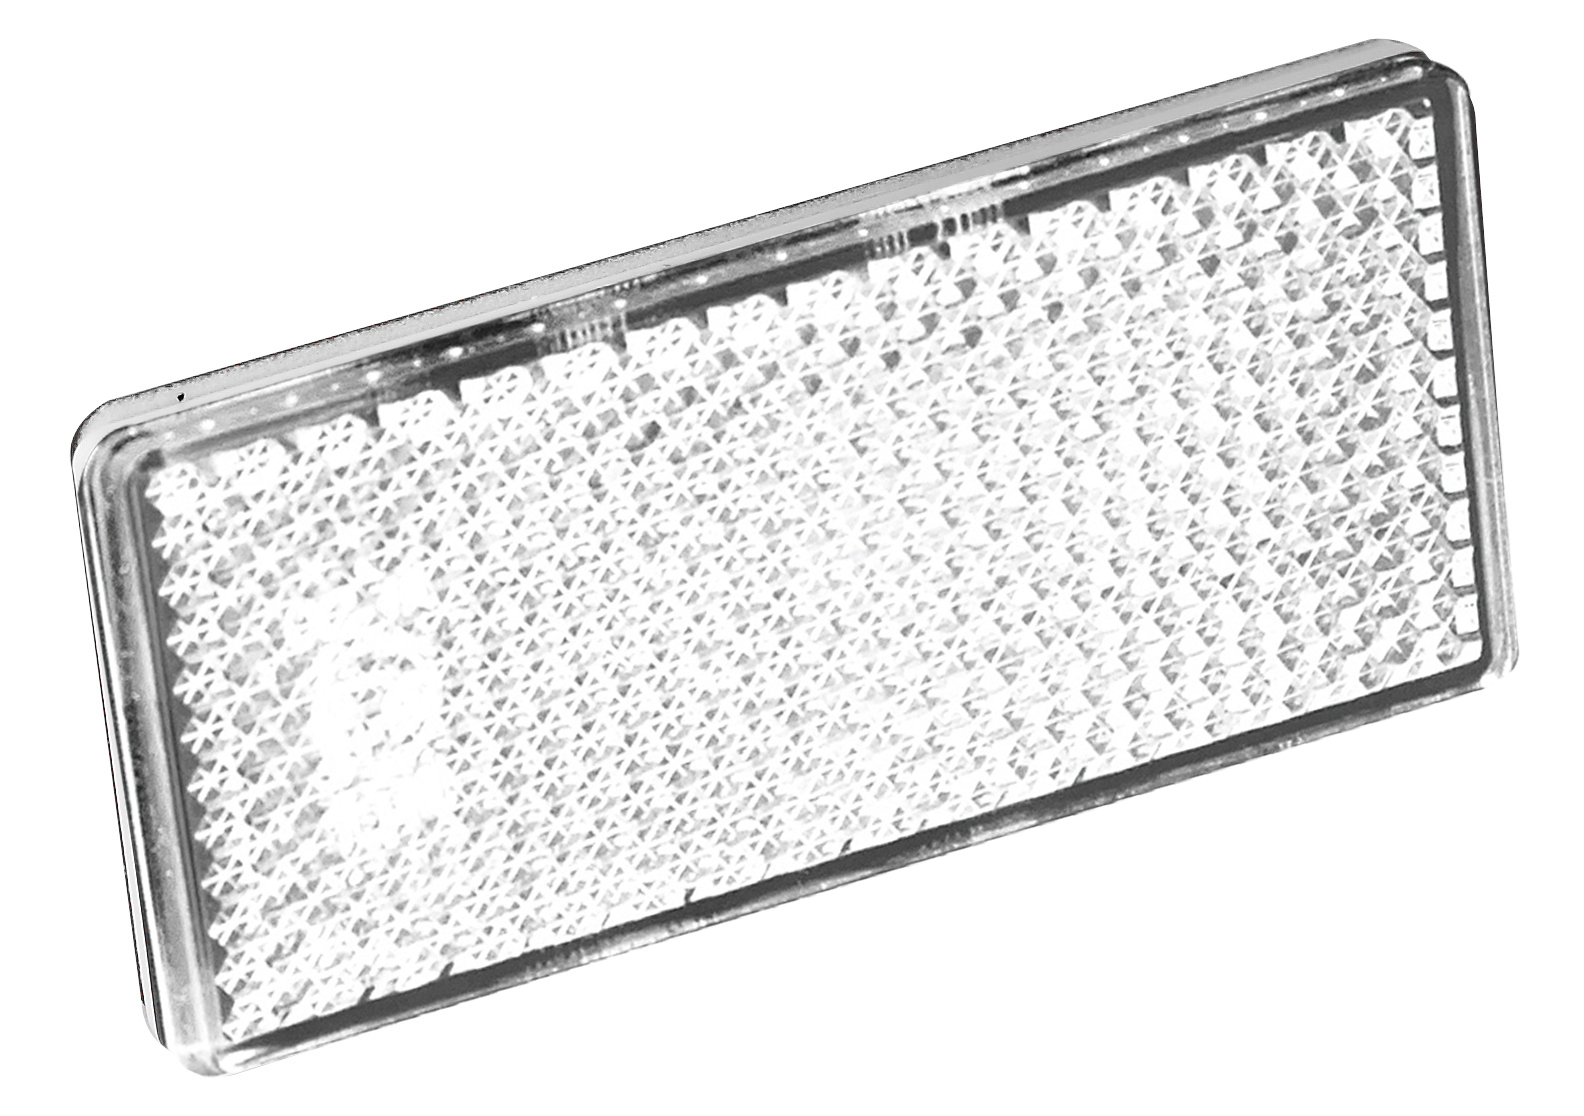 LED Autolamps 7030 series reflector